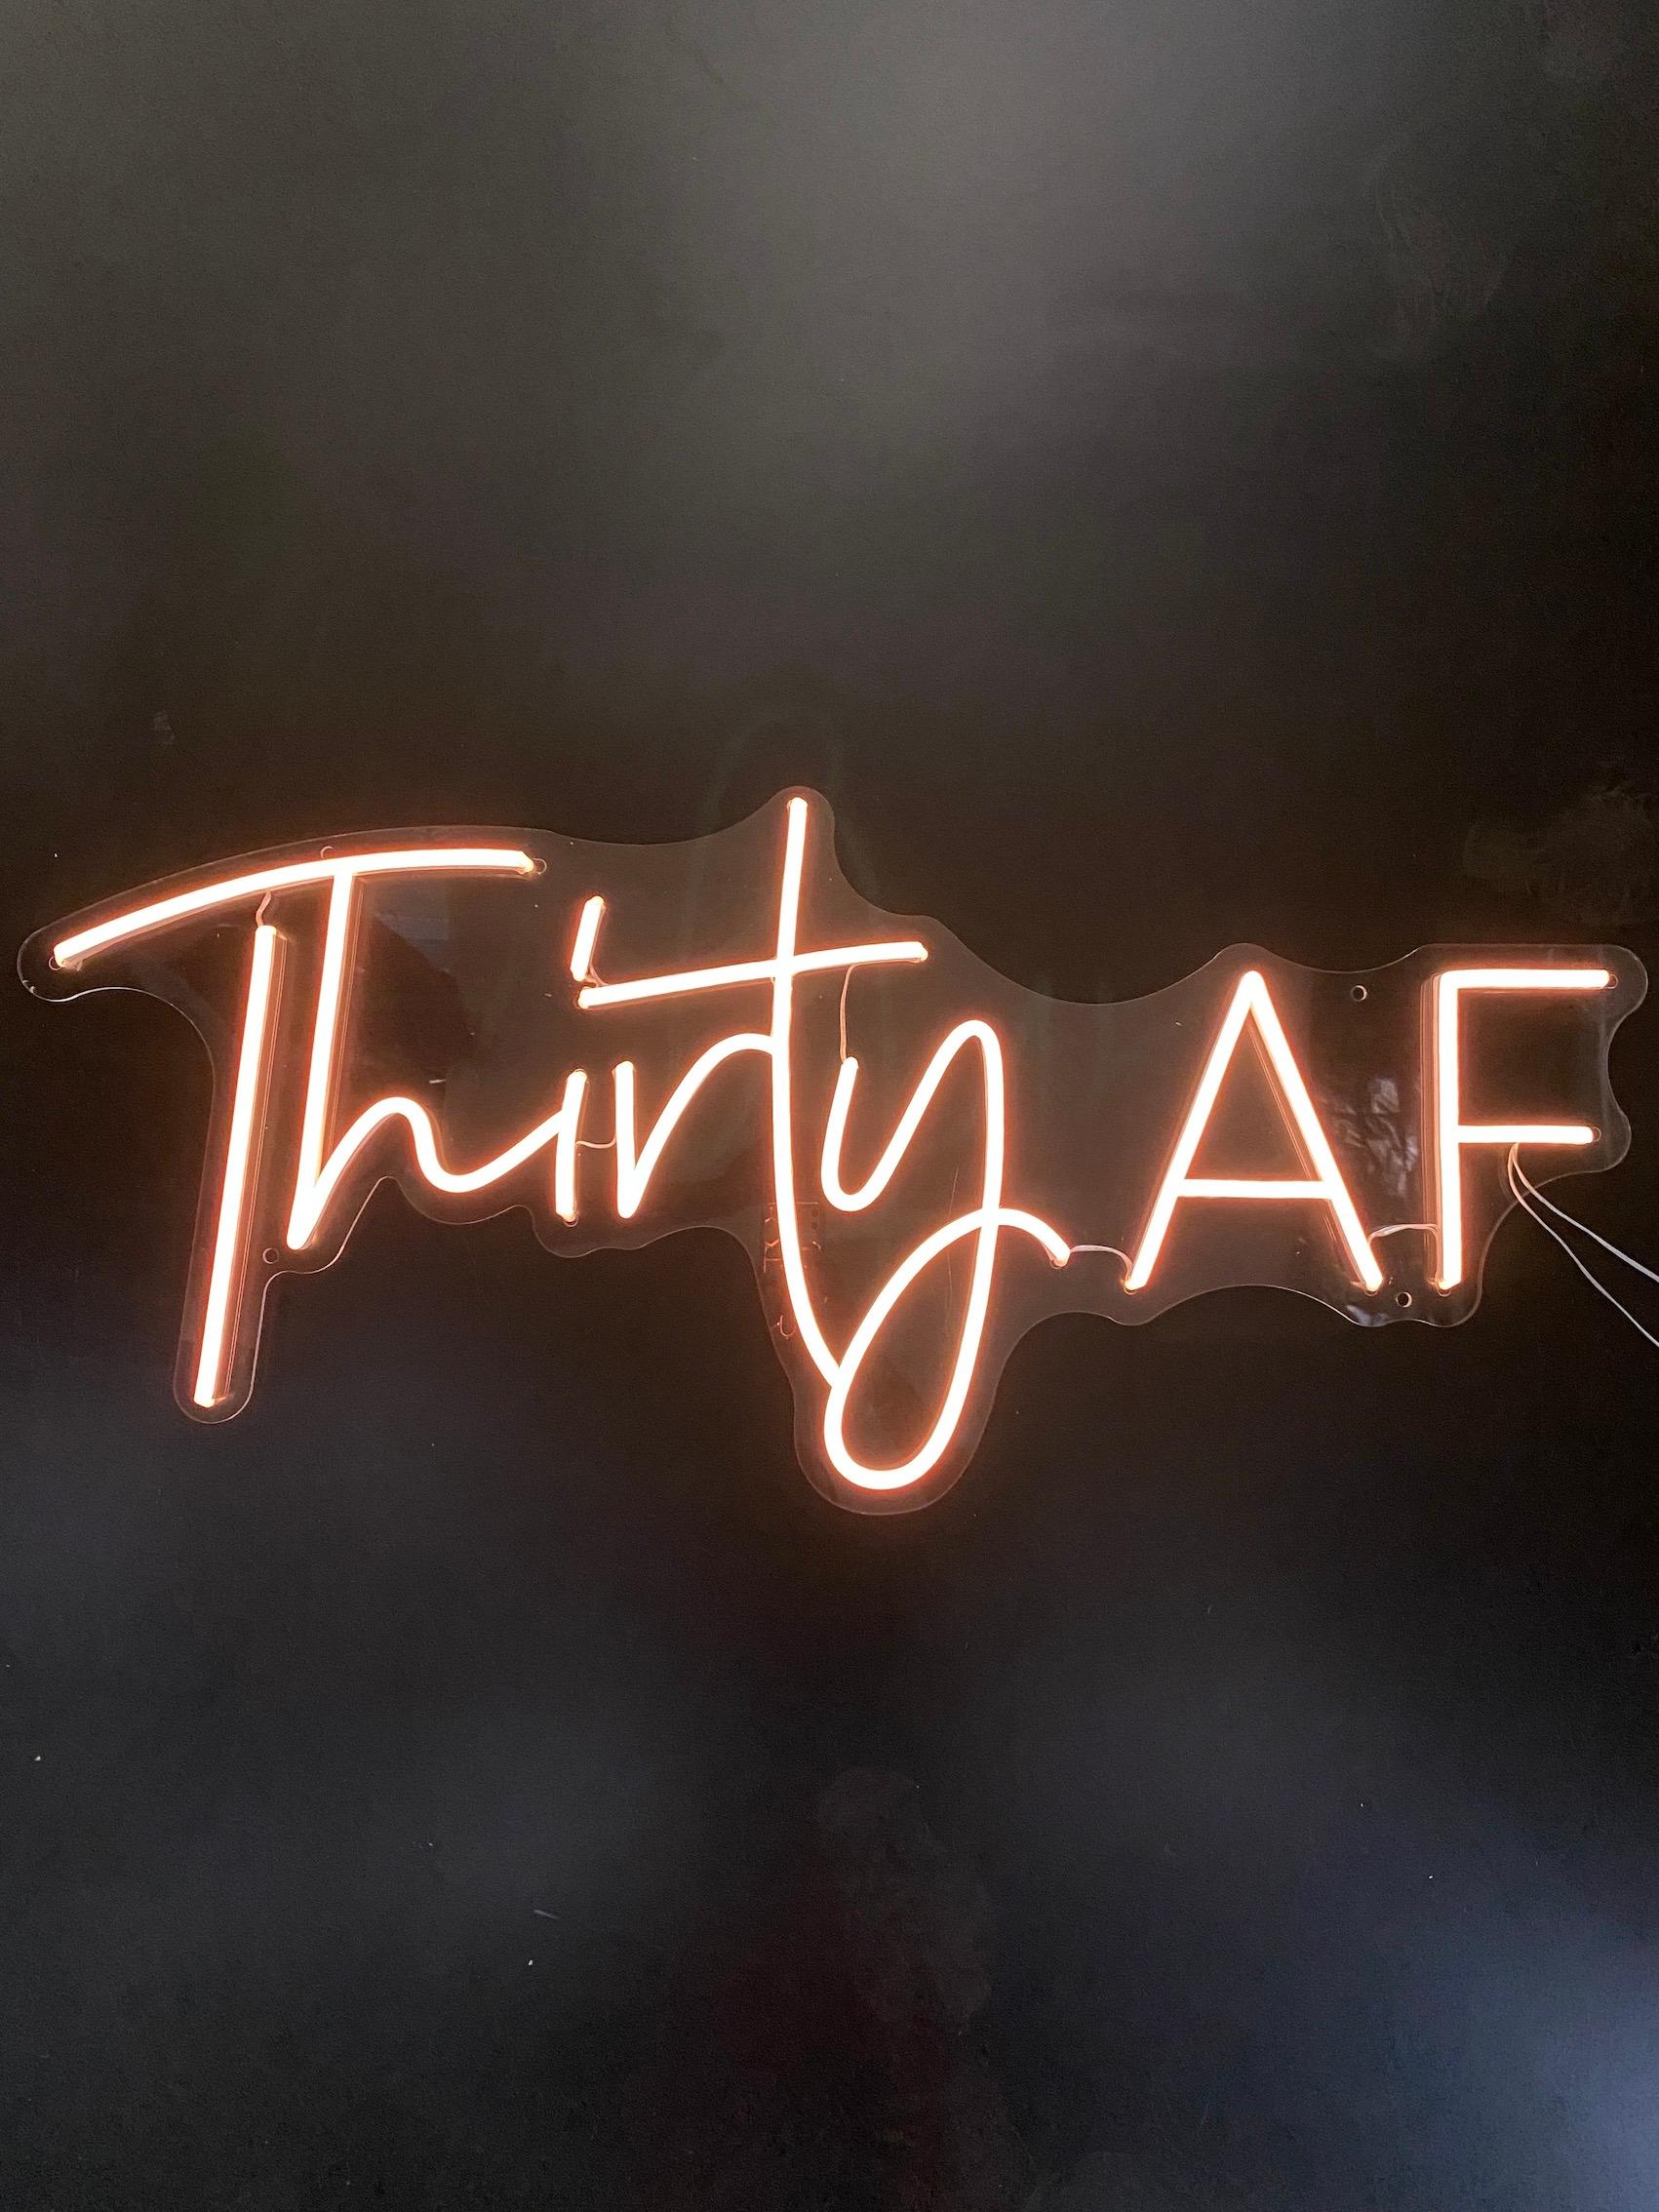 Thirty AF neon sign